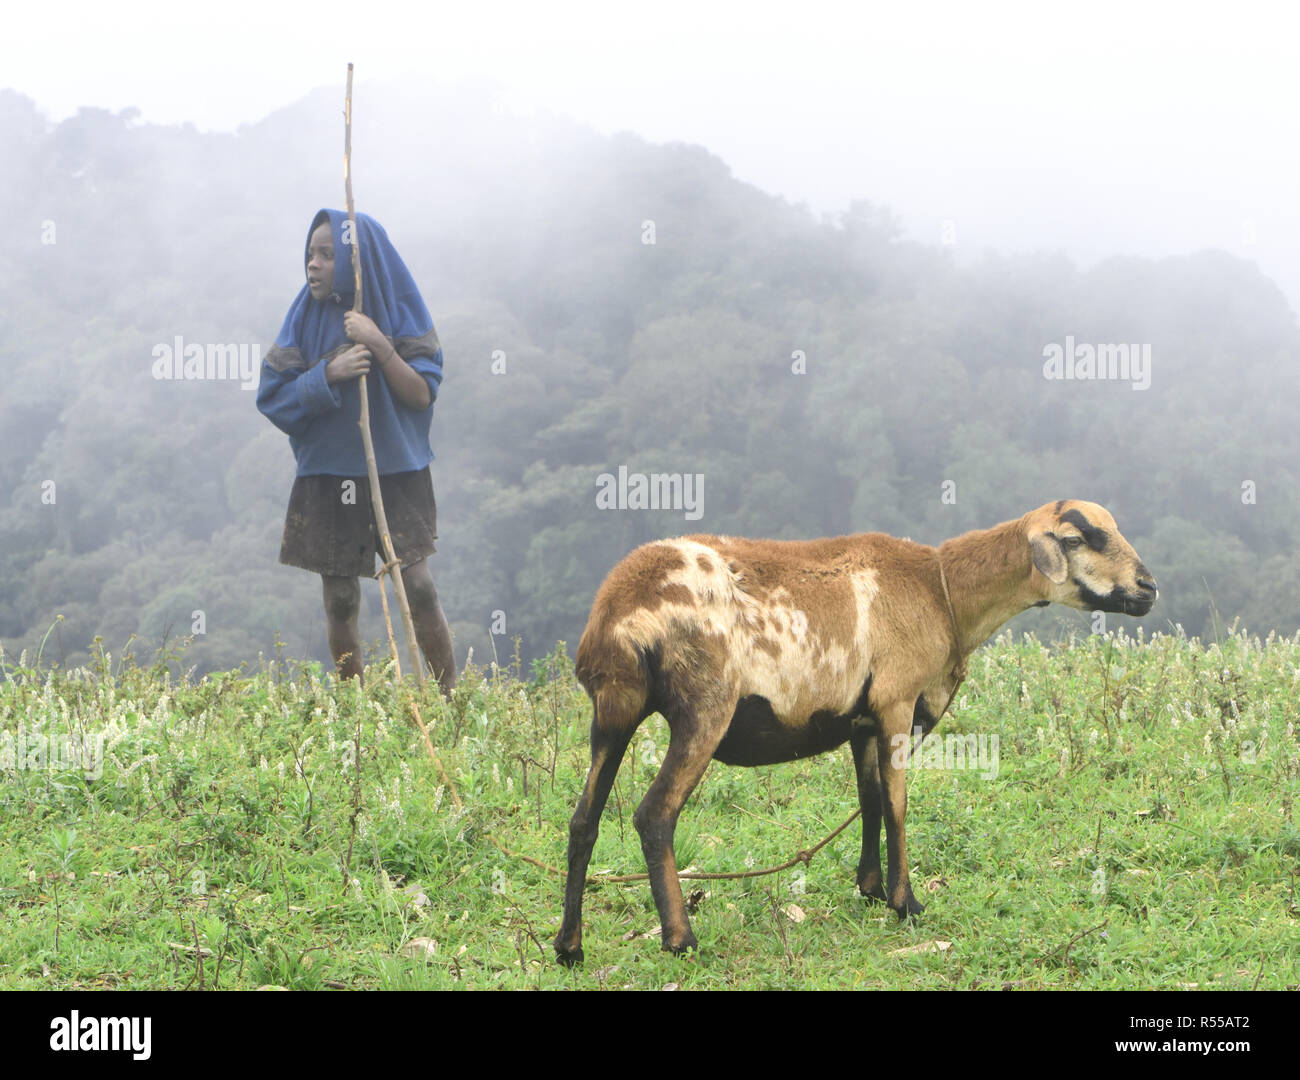 A girl tends a goat on a misty morning on the edge of Bwindi Impenetrable National Park. Mountain gorillas (Gorilla beringei beringei) live in the for Stock Photo